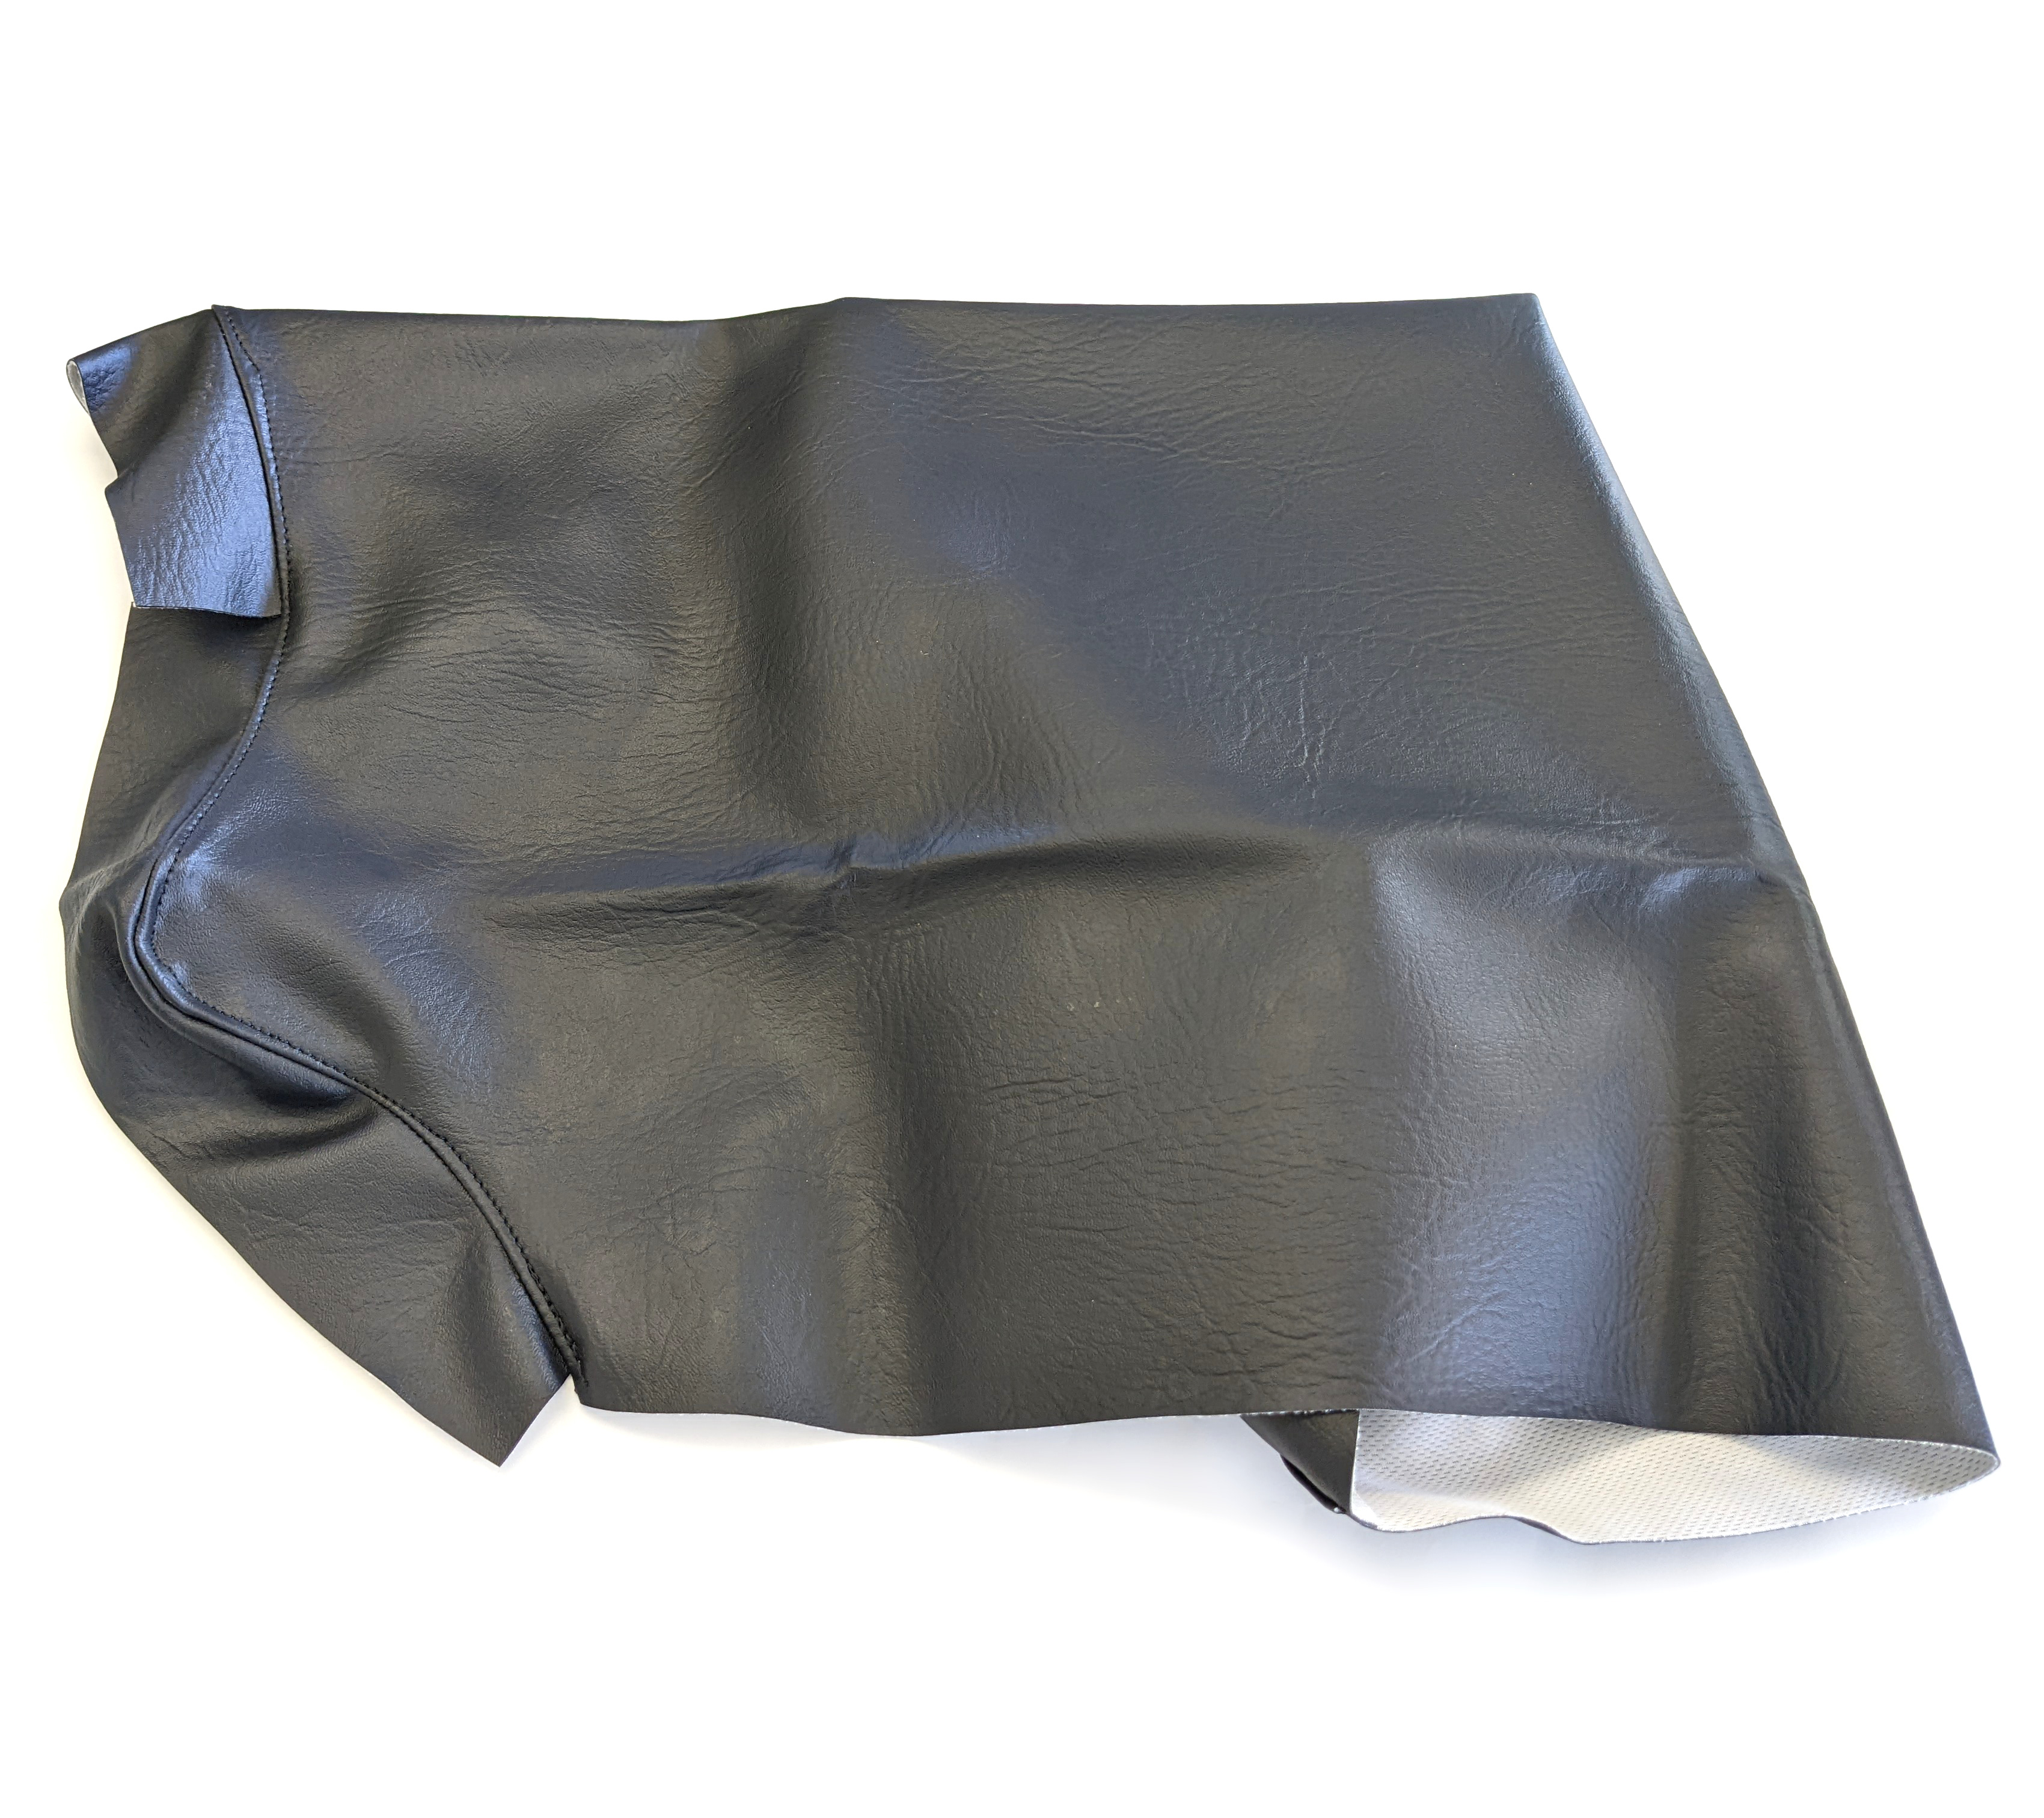 Standard Black Seat Cover ONLY - Honda TRX250 Recon - Click Image to Close